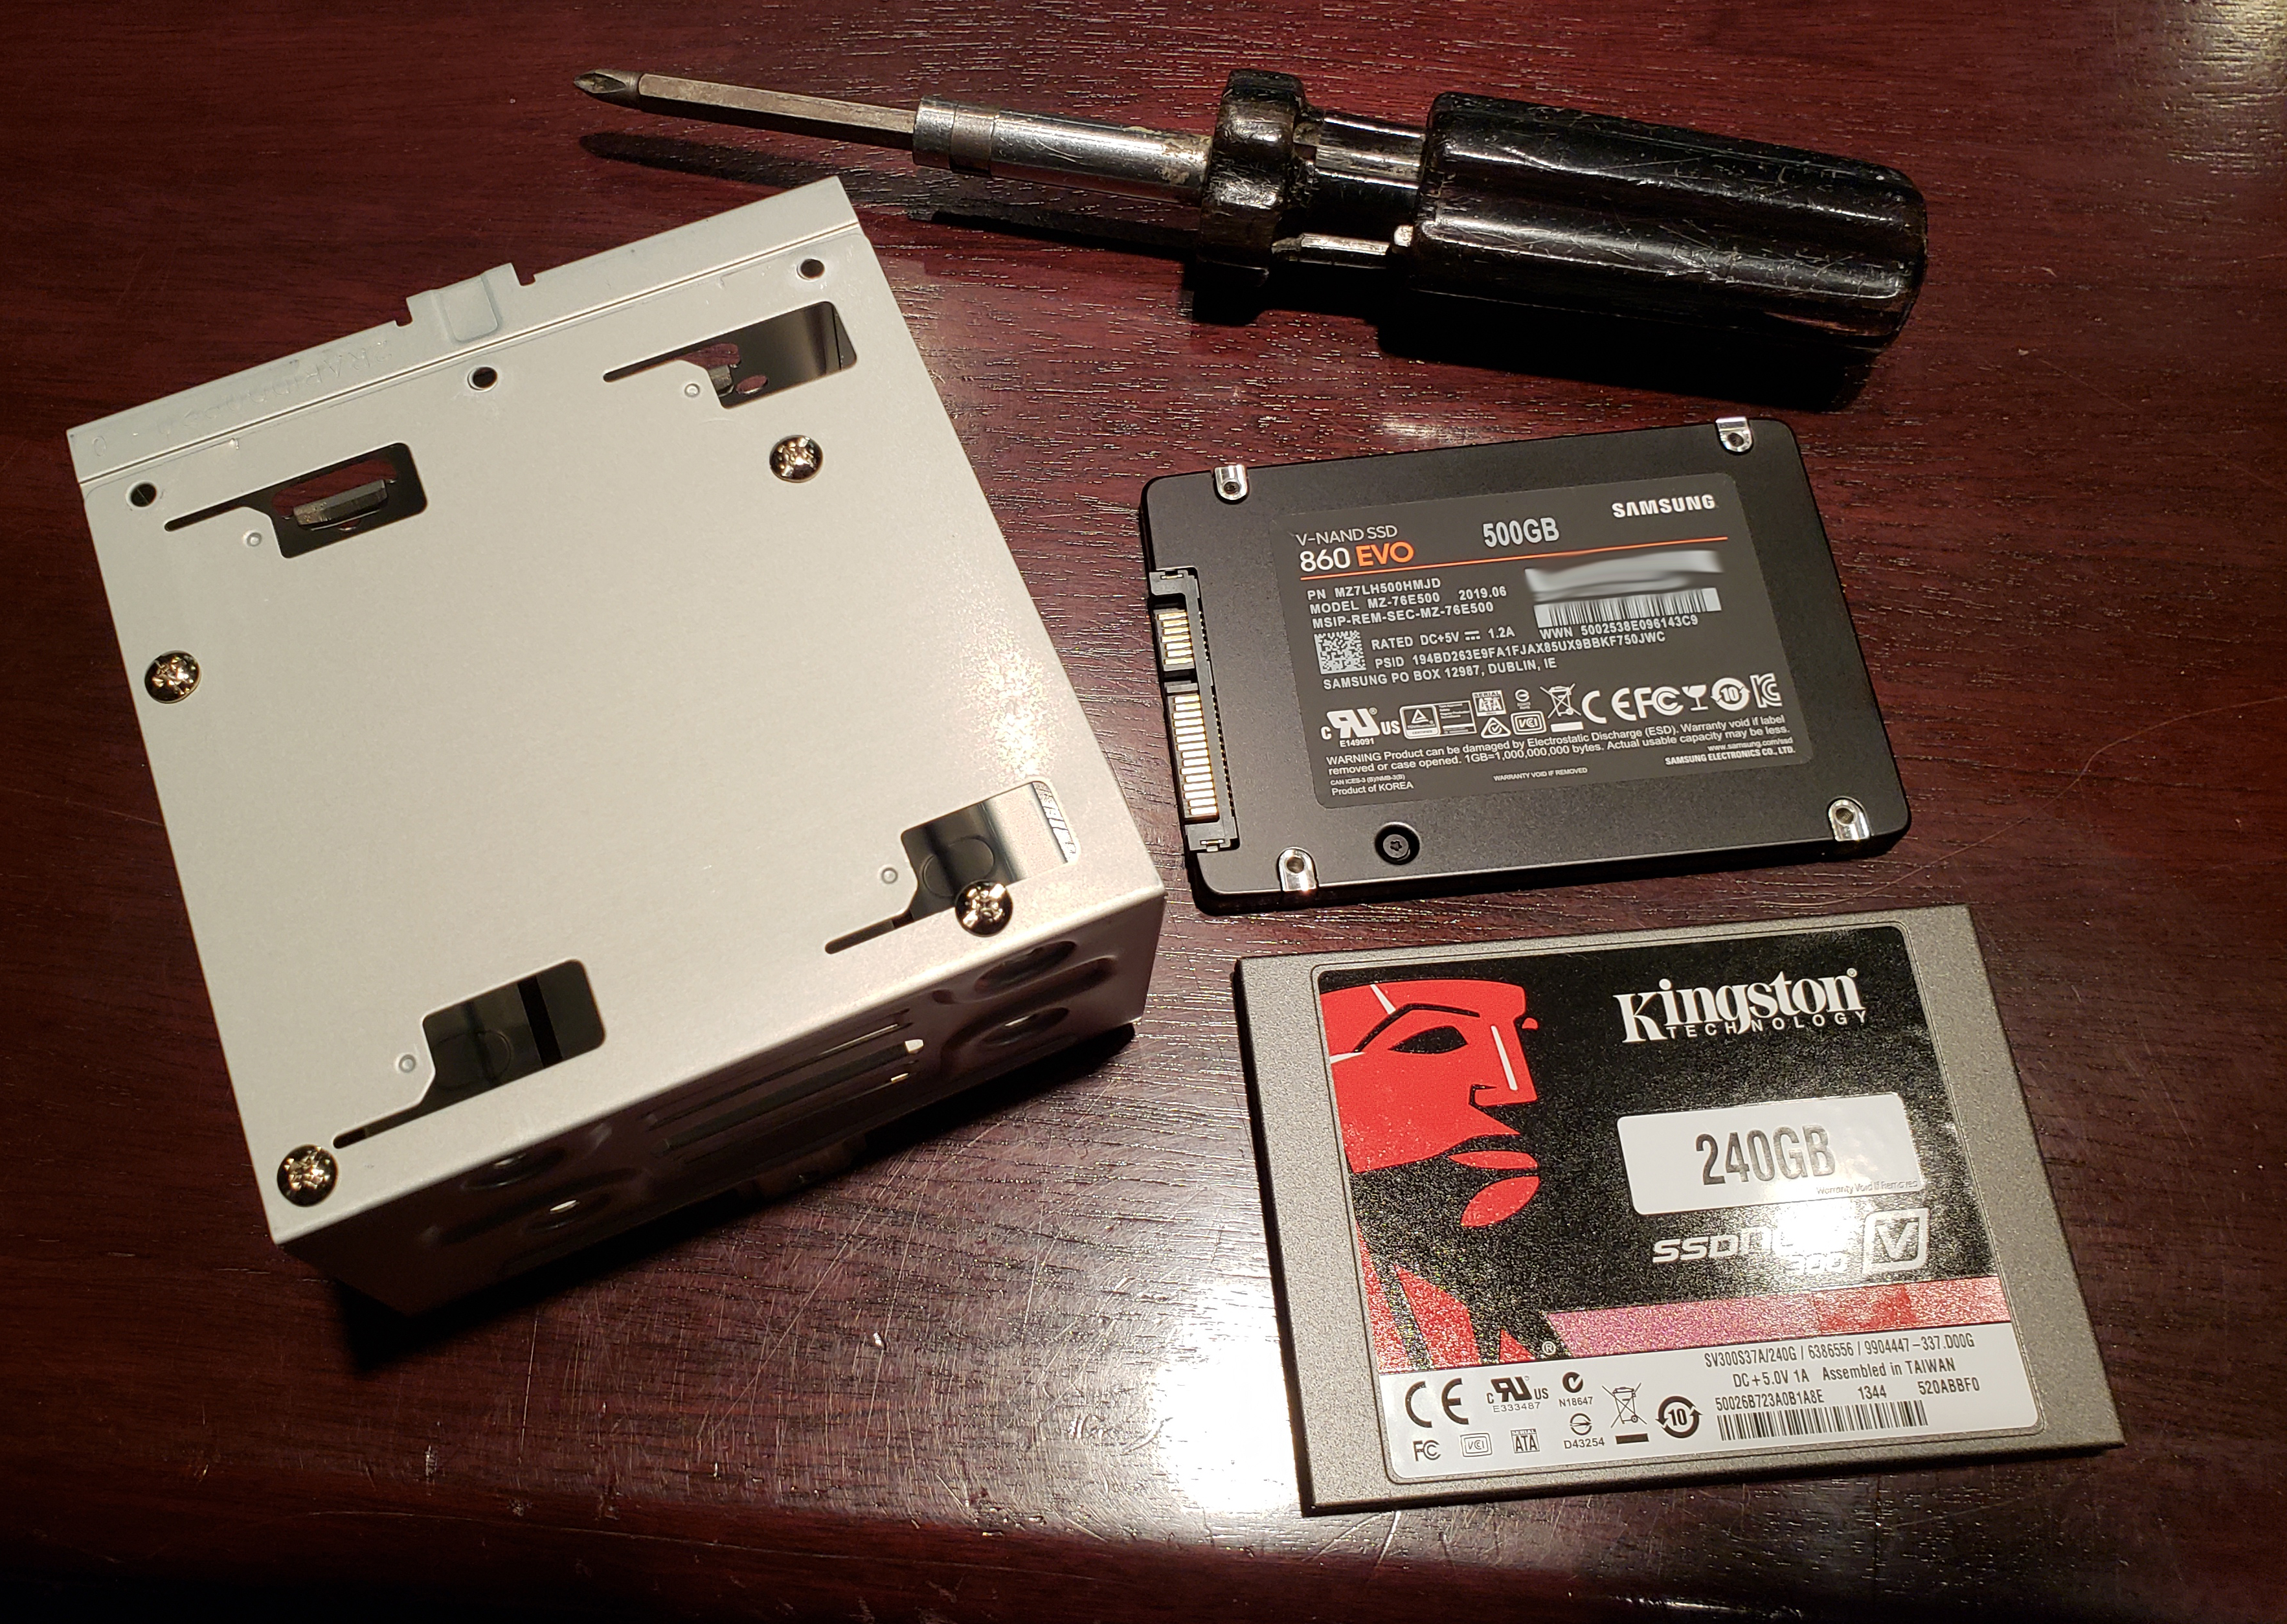 larger SSD upgrade